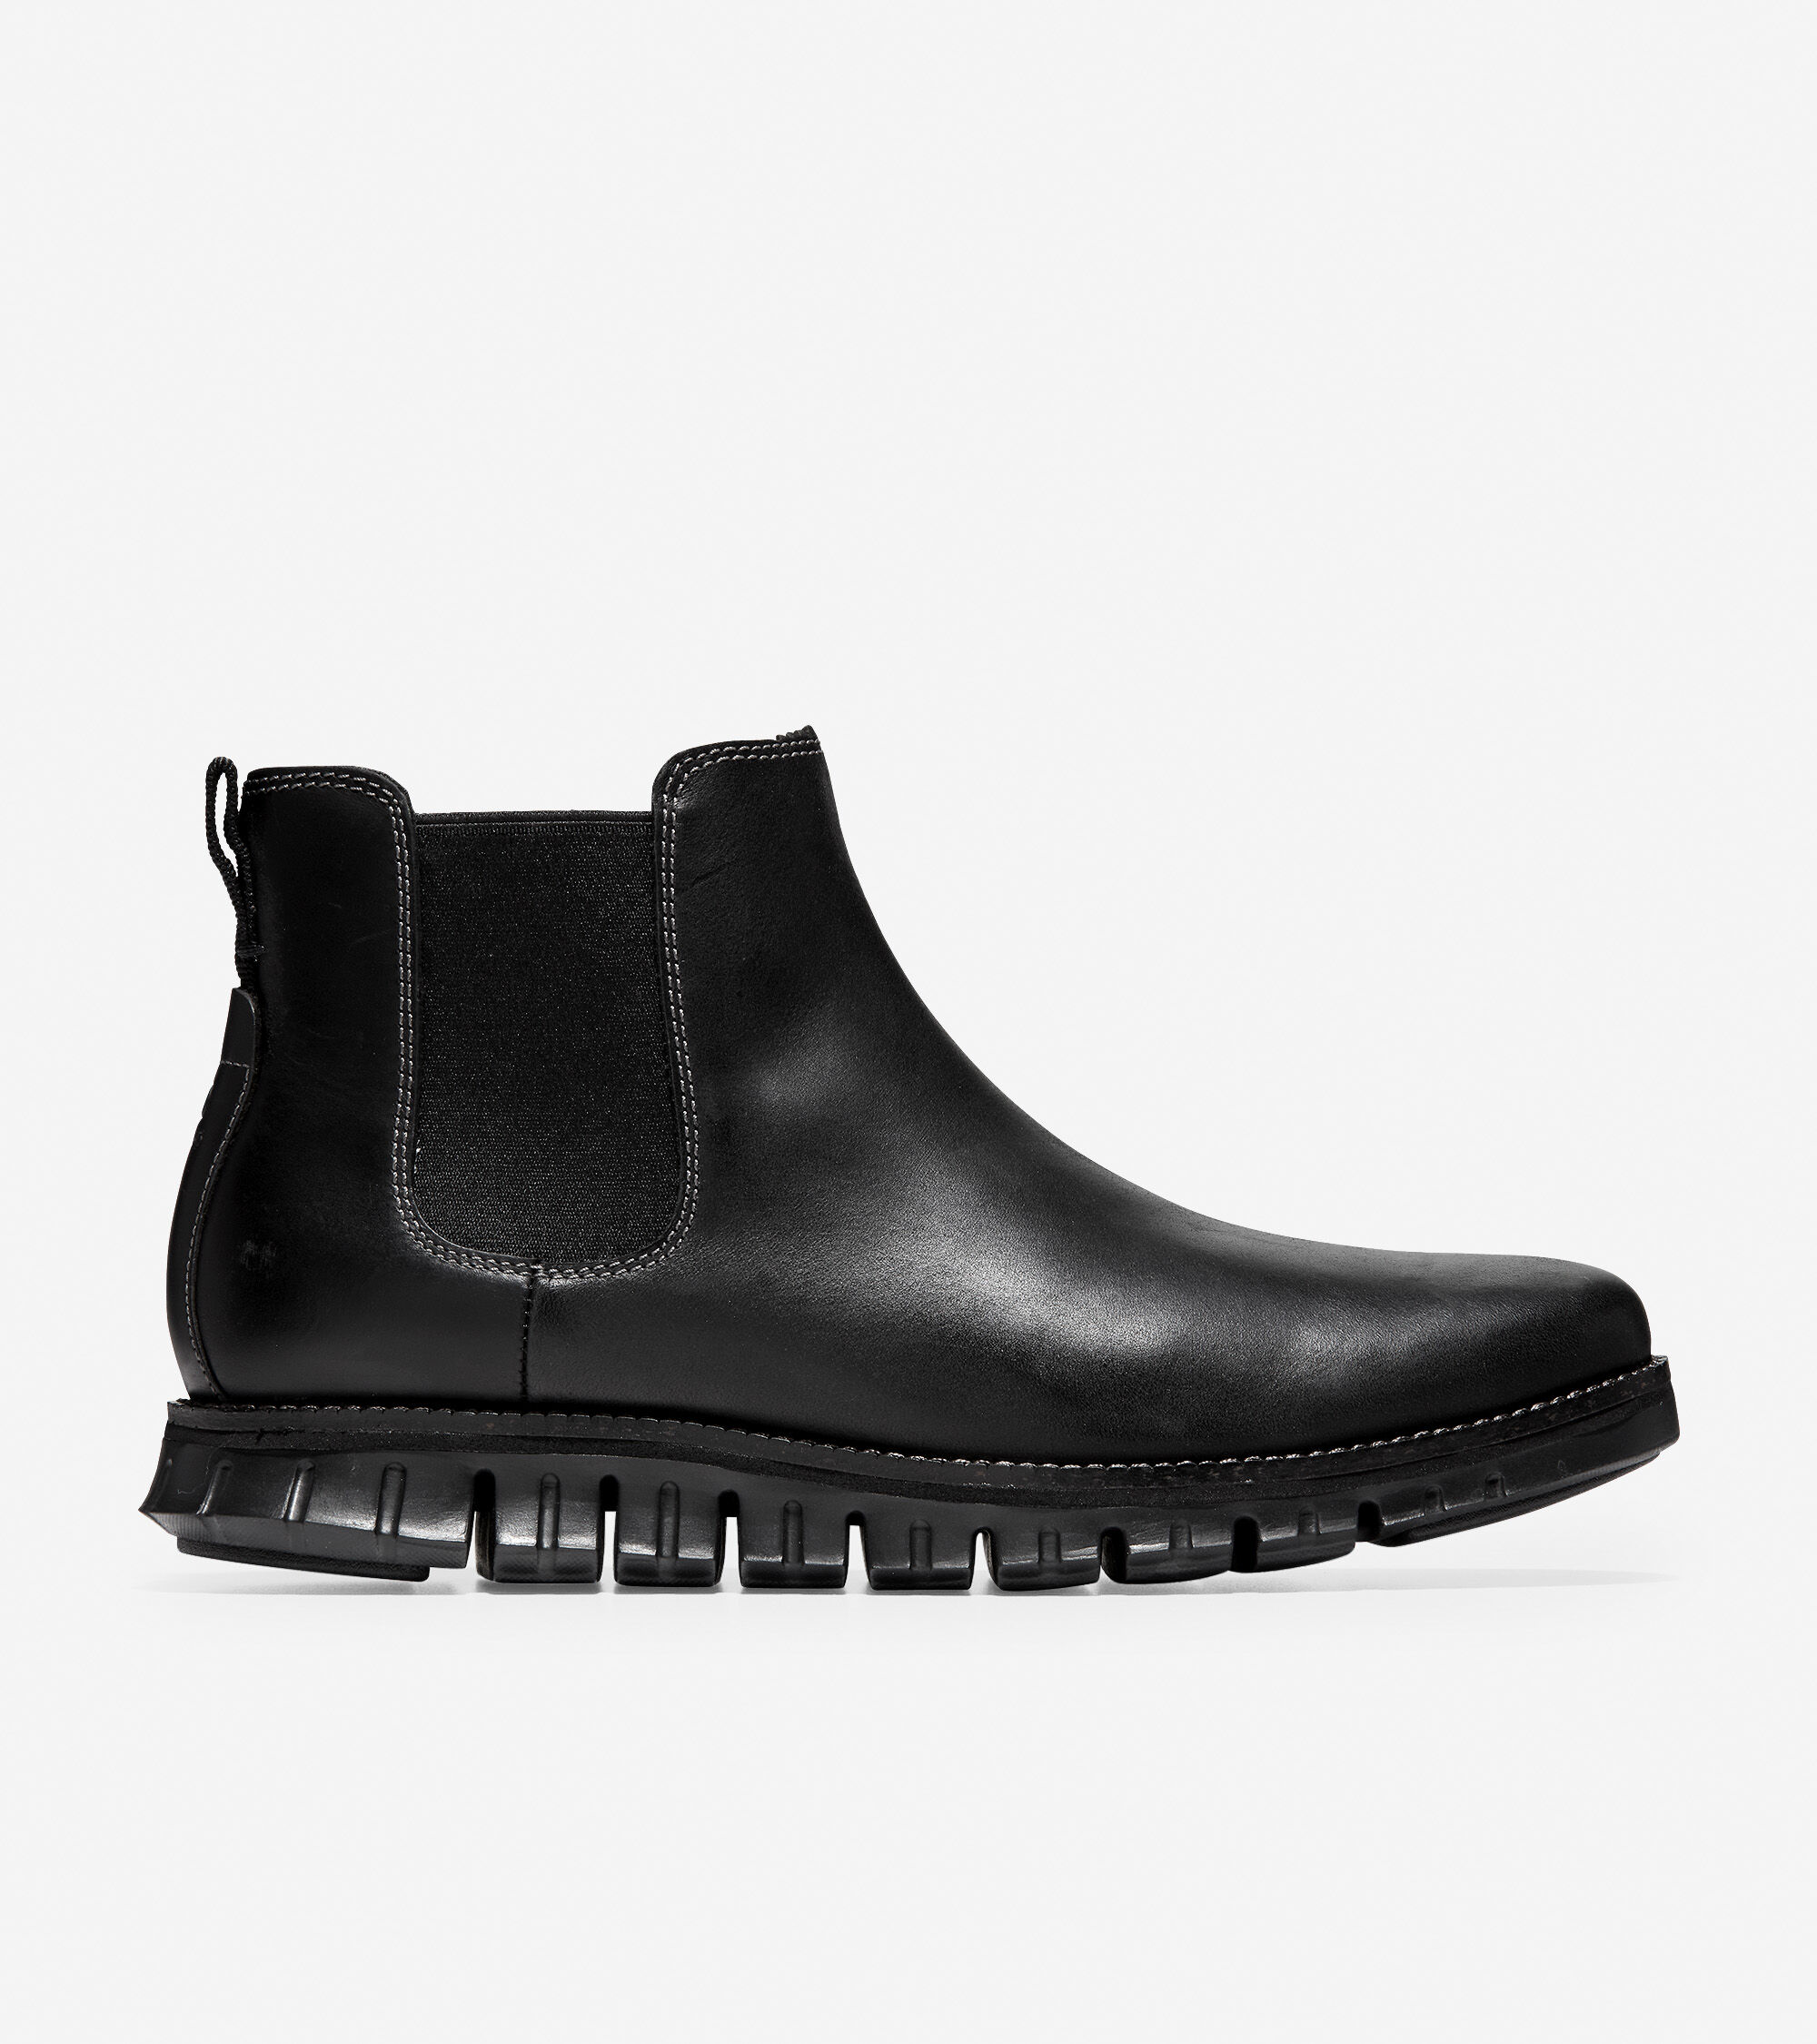 Chukkas \u0026 Ankle Boots | Cole Haan